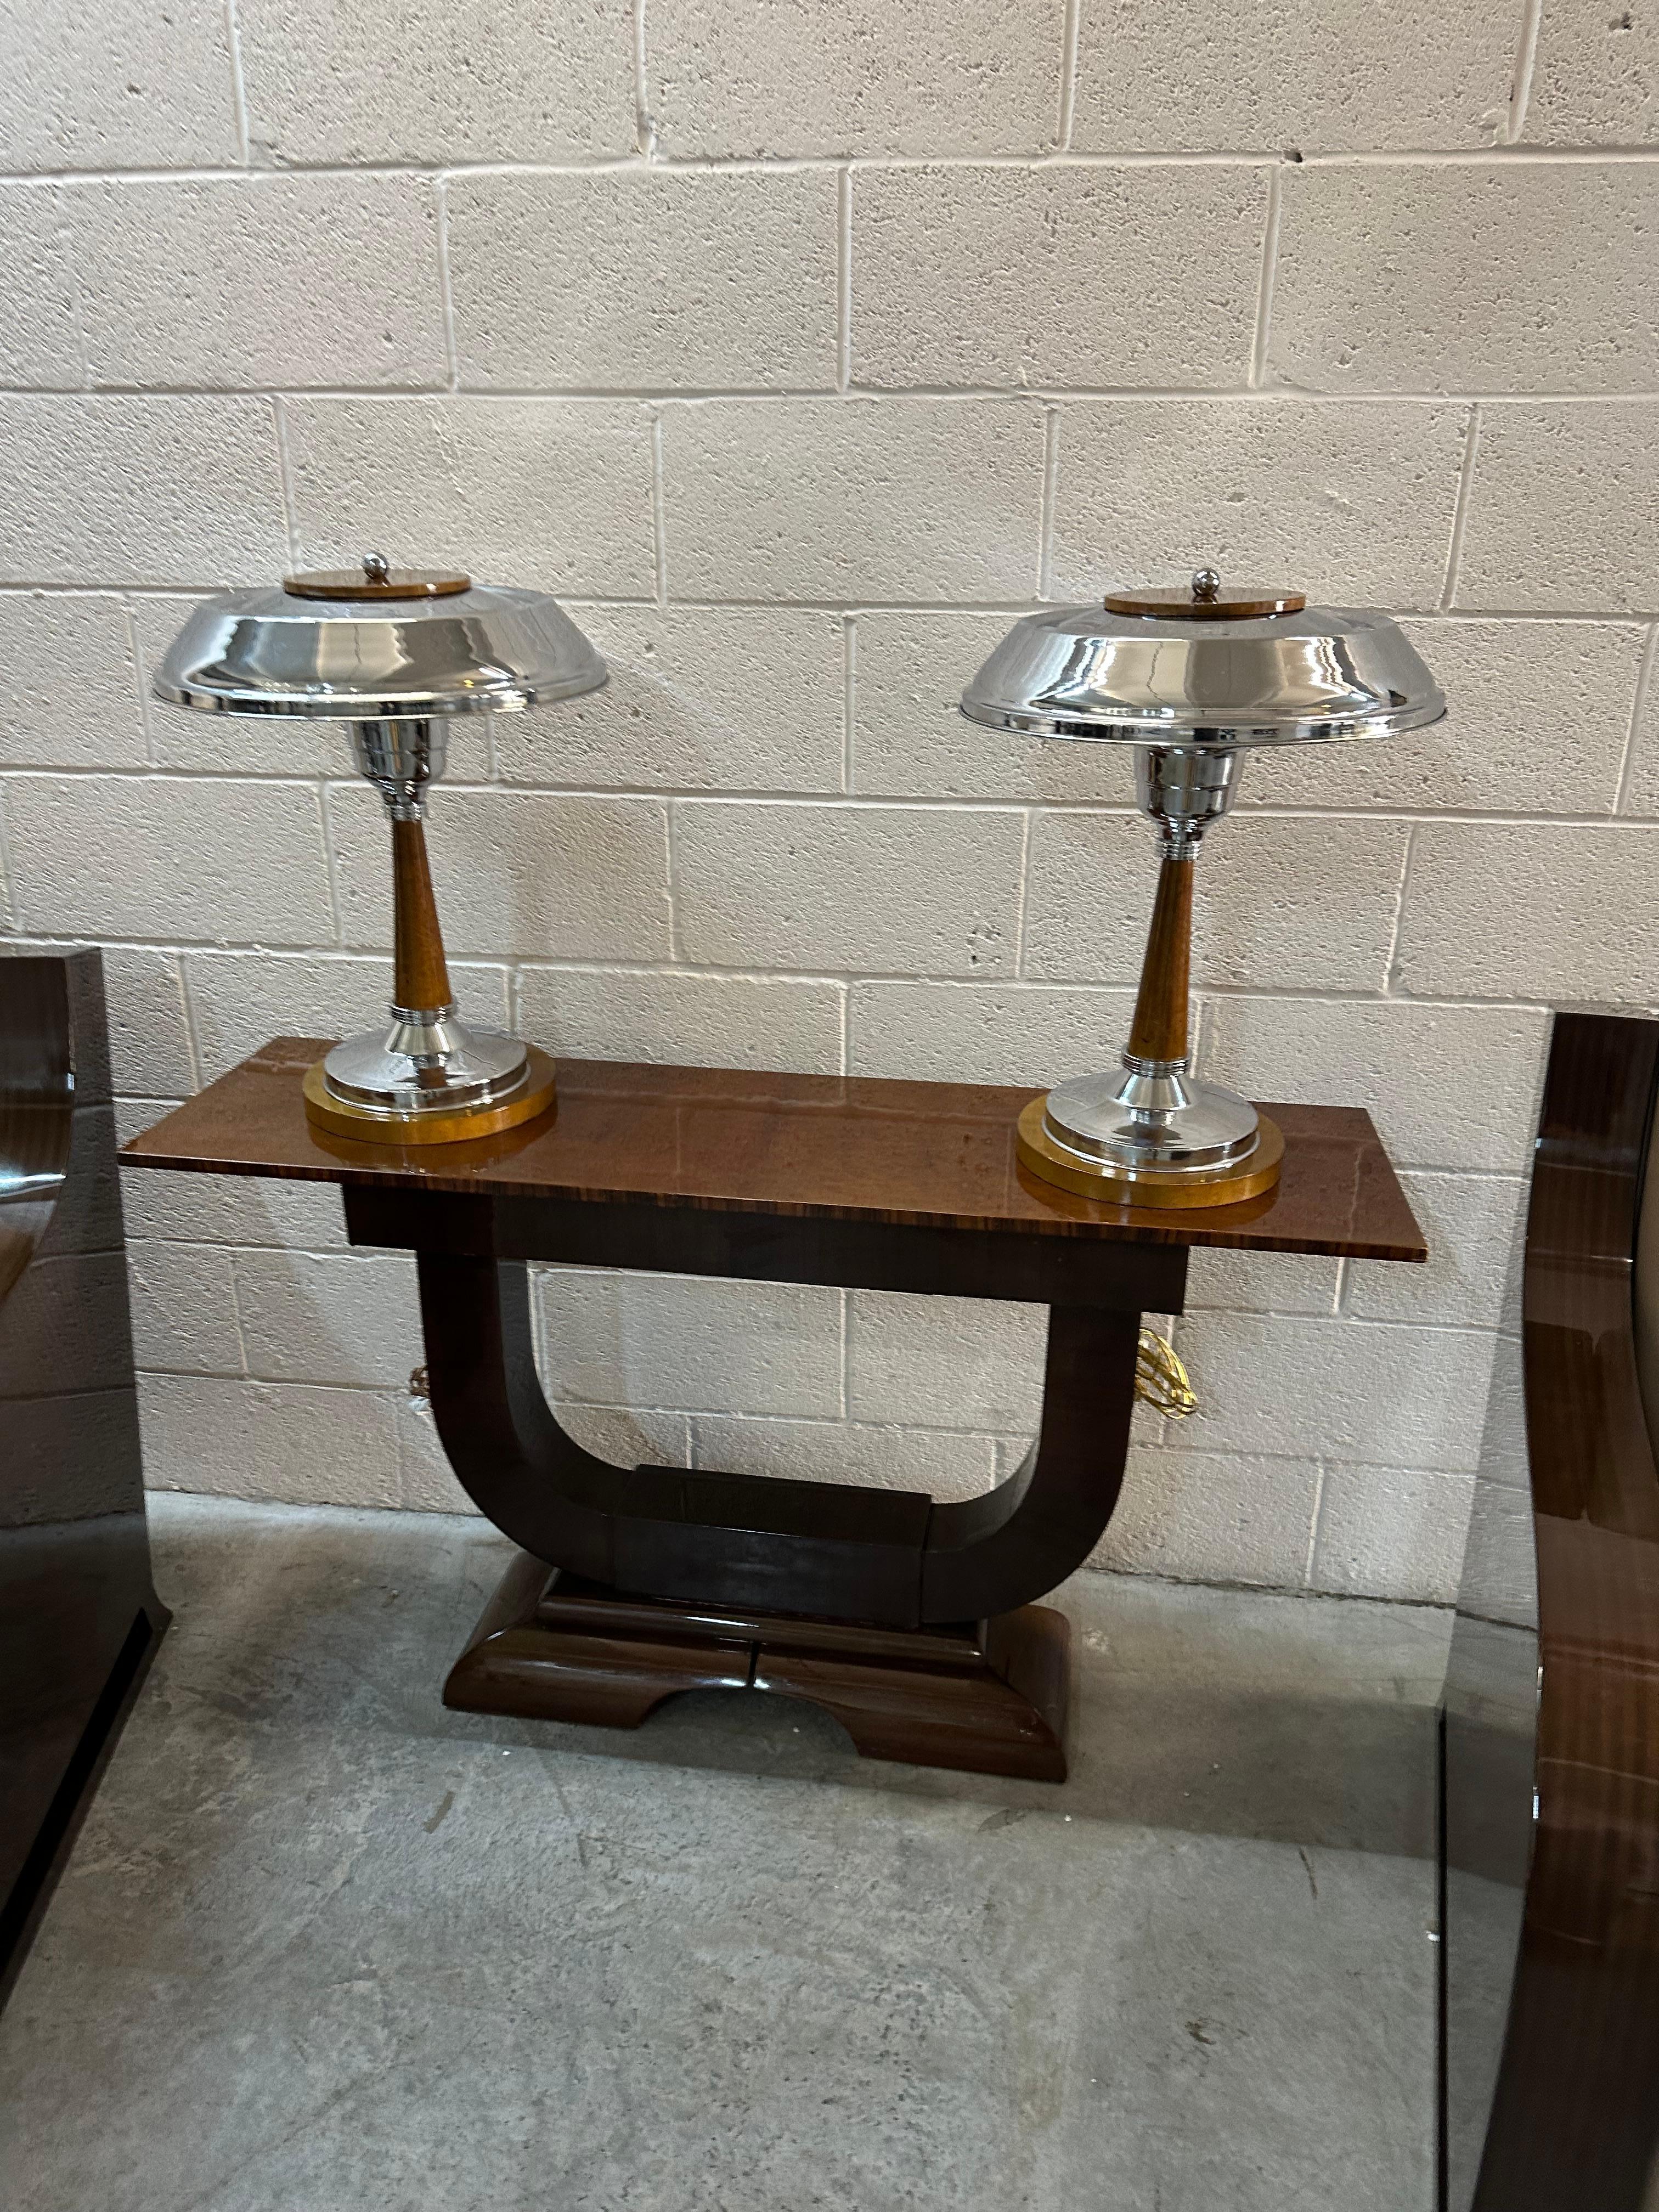 Pair of Art Deco Table Lamps in wood and chrome, 1920, France For Sale 7